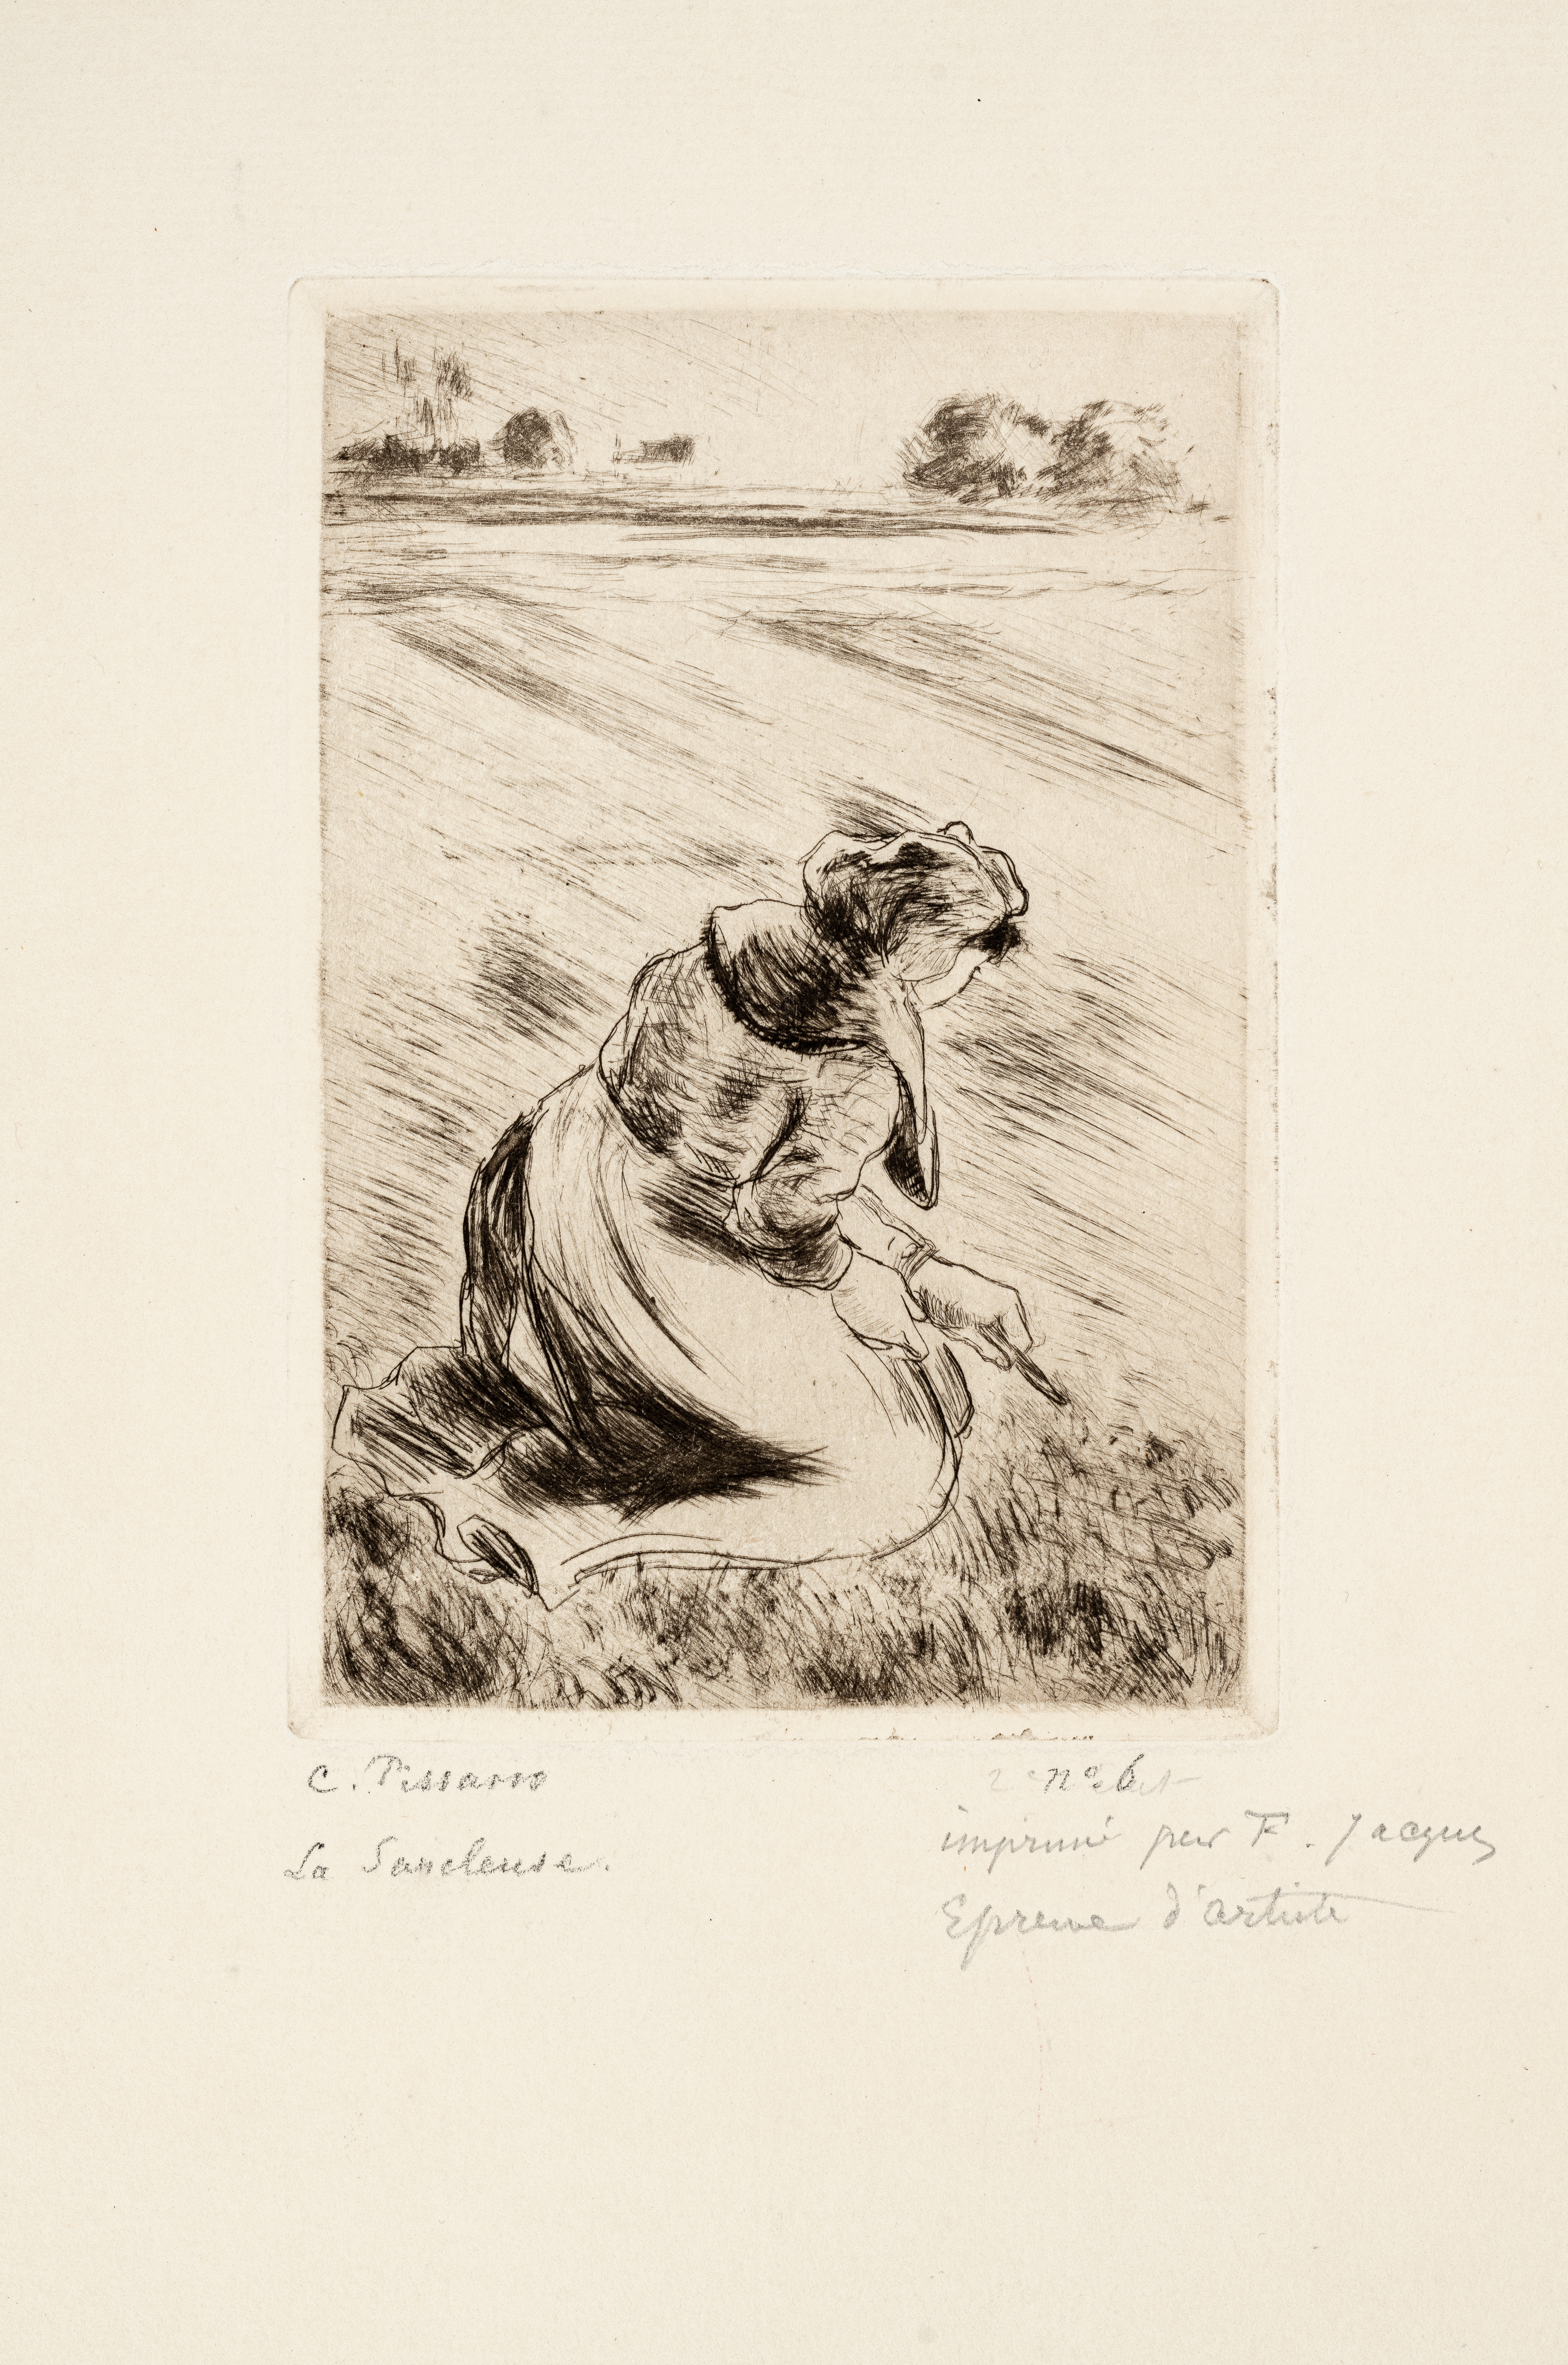 Camille Pissarro, La Sarcleuse, 1887, etching with drypoint